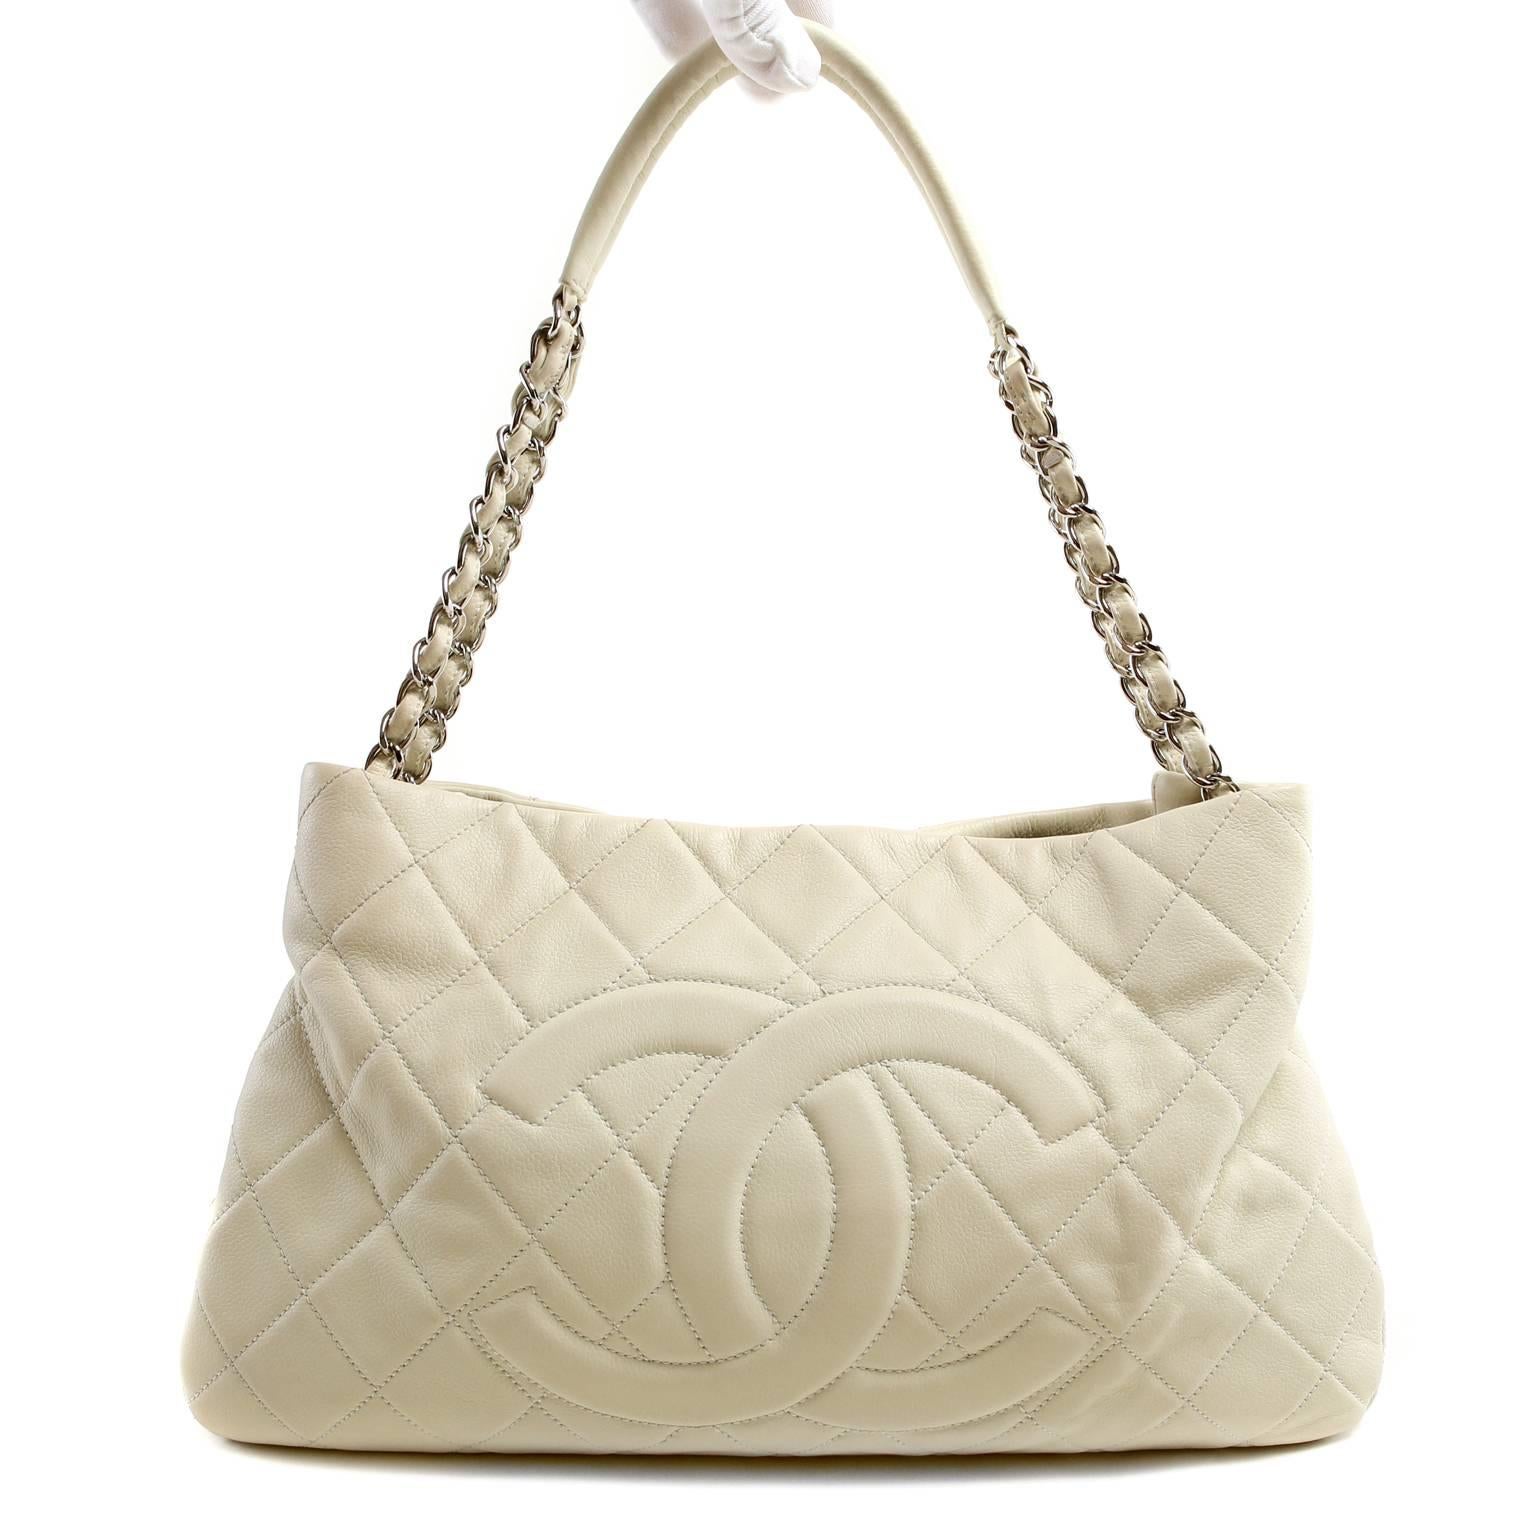 Chanel Ivory Leather Zip Around Expandable Tote Shoulder Bag 5